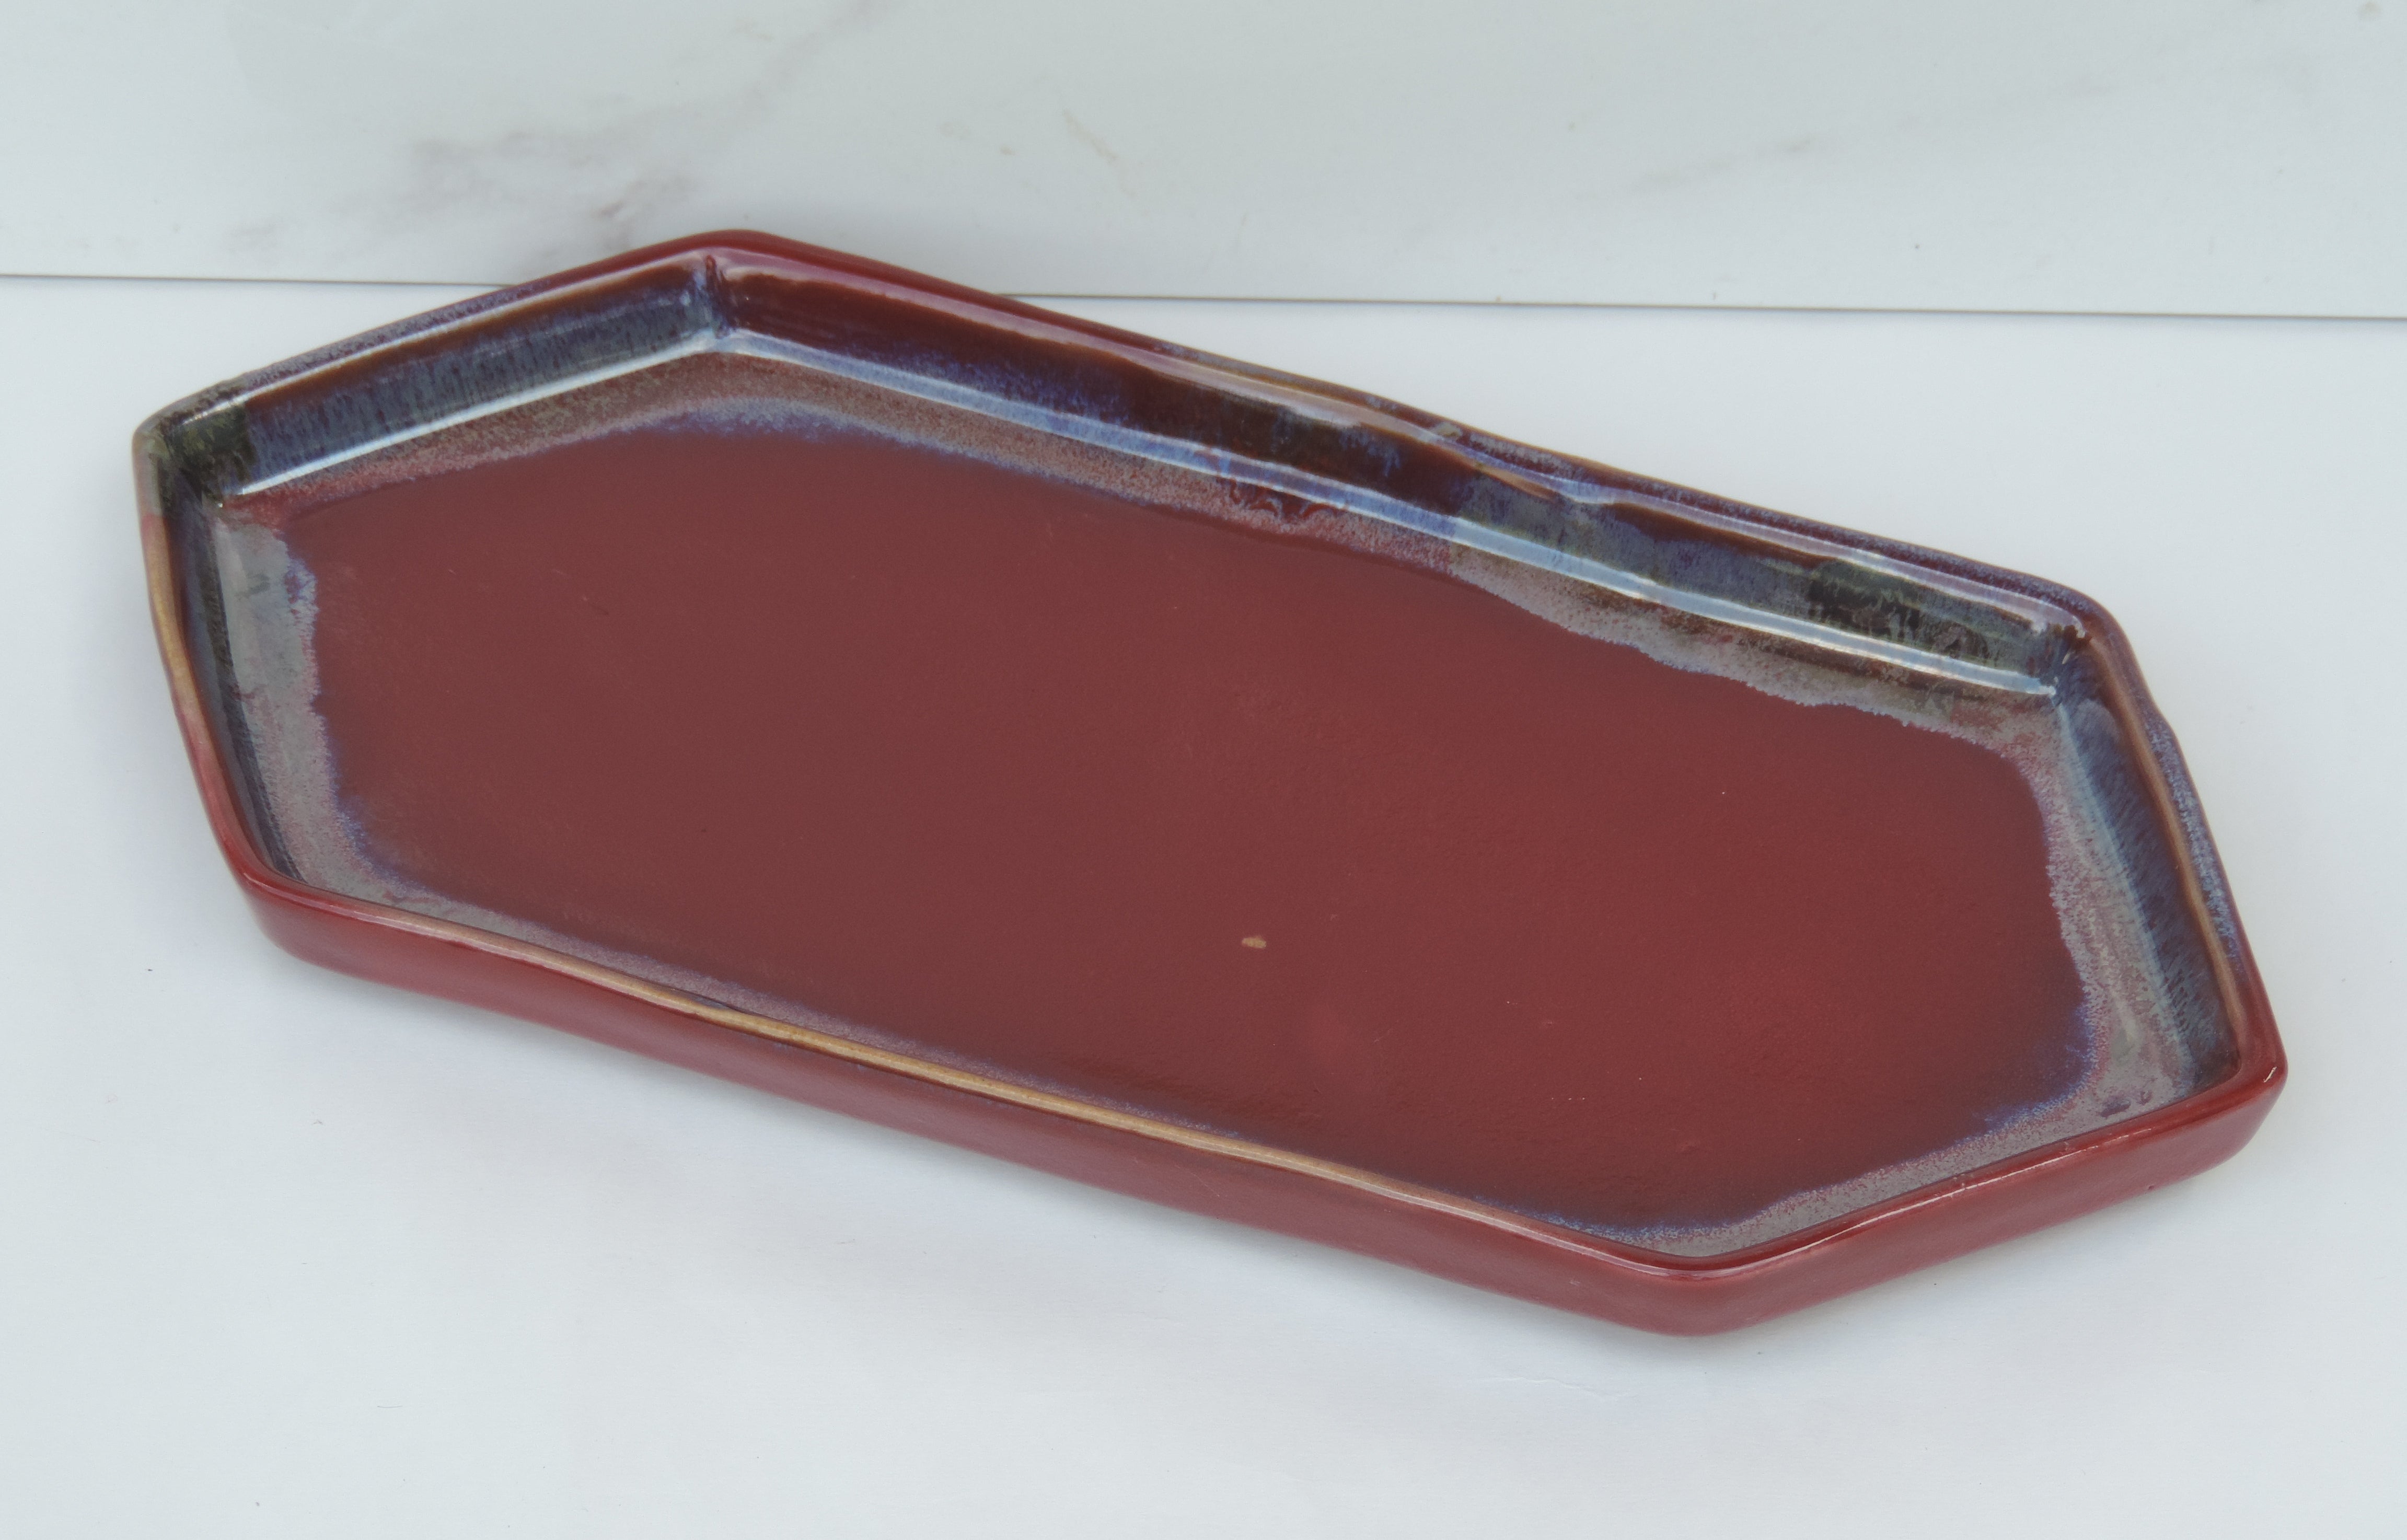 Dinerware Collection - Red Platters - Ceramic